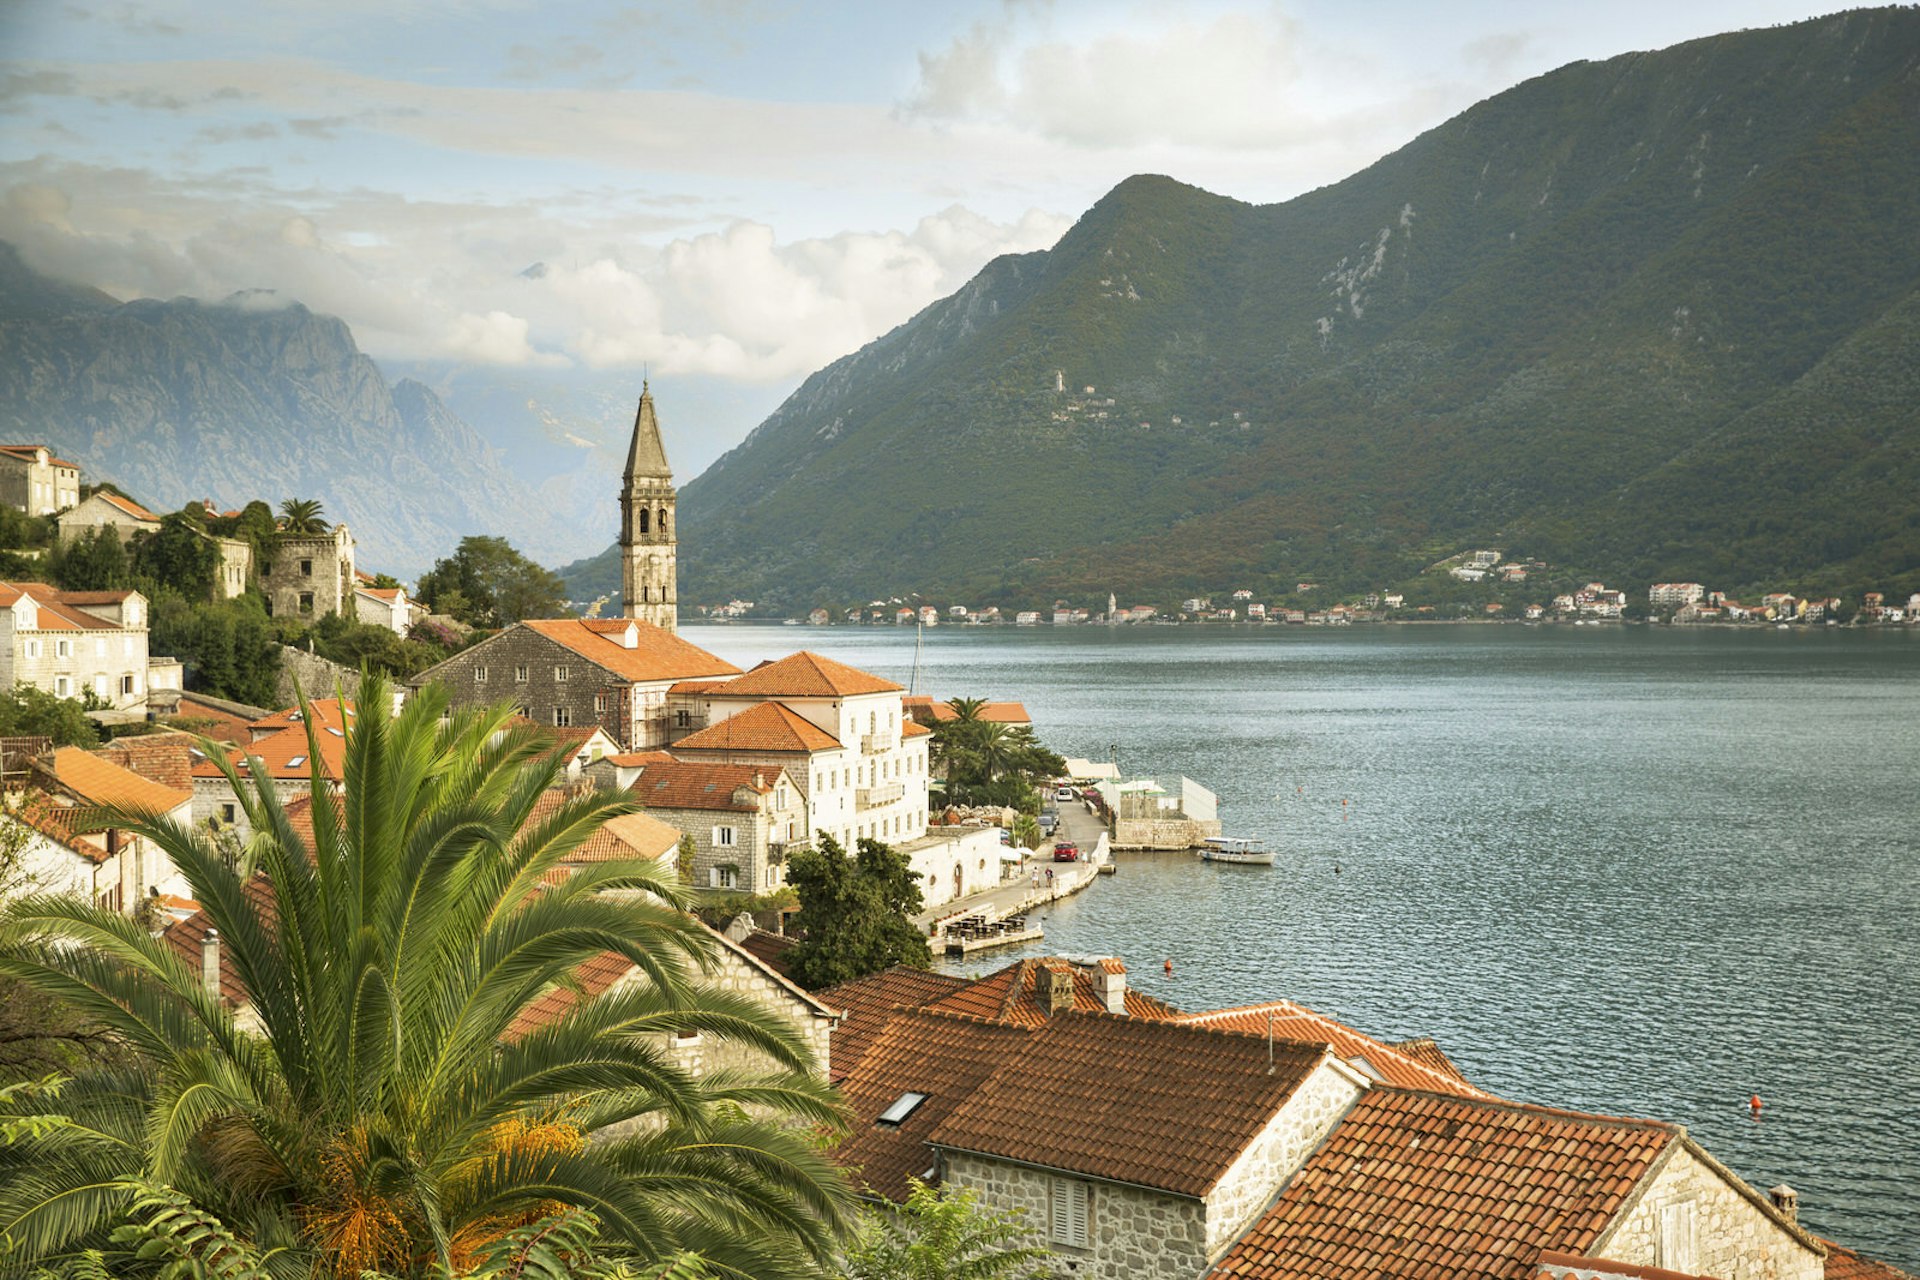 The tiny Venetian town of Perast on the Bay of Kotor © Julian Love / Lonely Planet